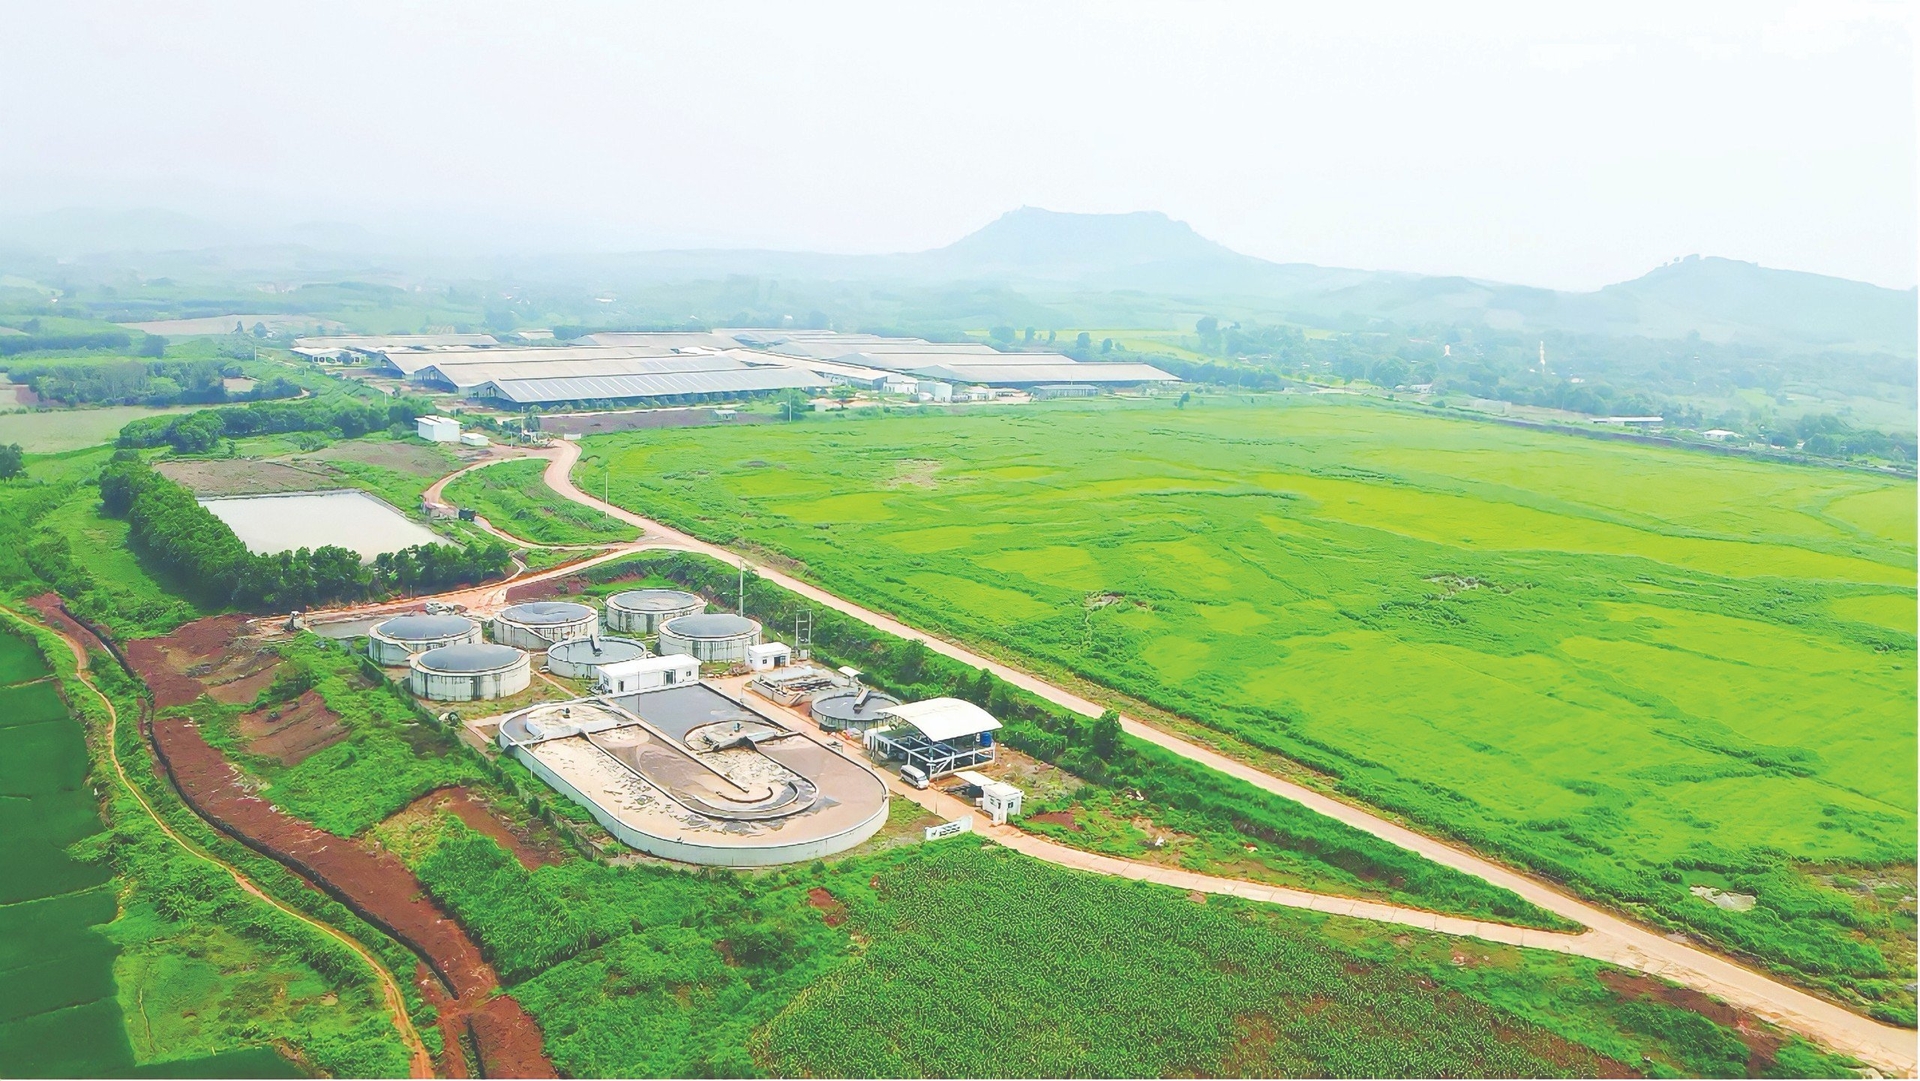 TH's wastewater treatment system at Camp Cluster No. 3 has a capacity of 1,200 m3/day.